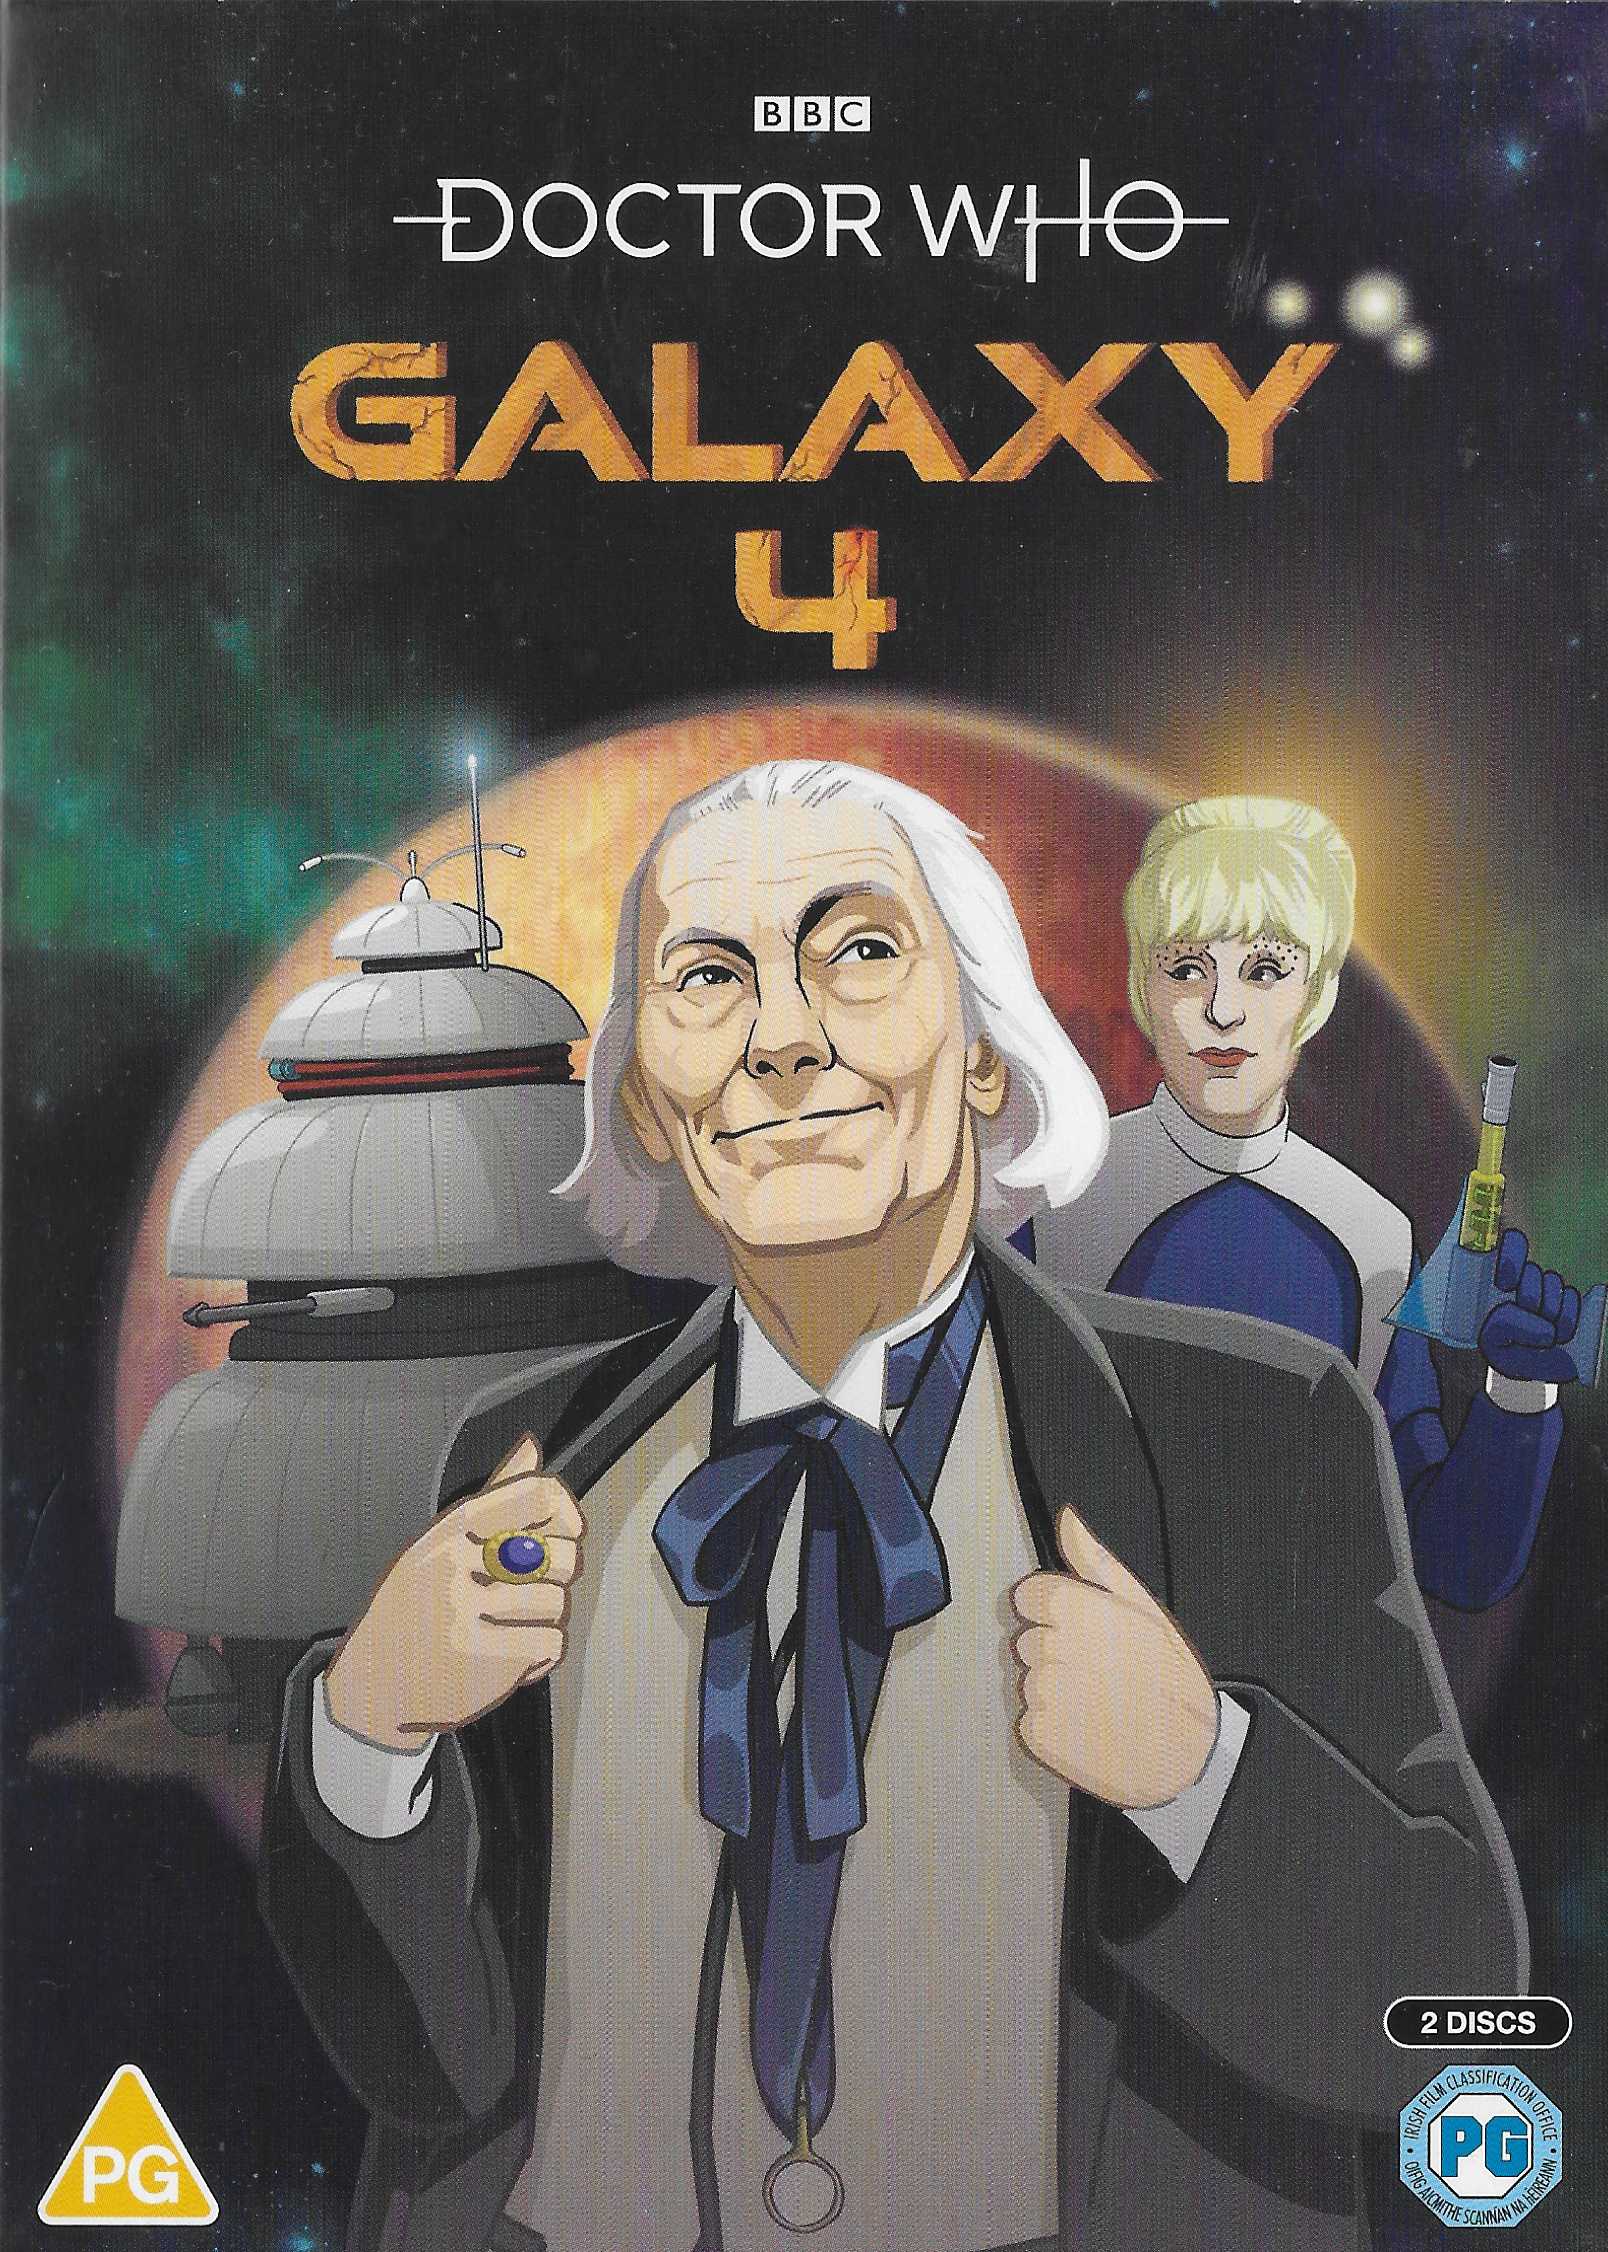 Picture of BBCDVD 4463 Doctor Who - Galaxy 4 by artist William Emms from the BBC records and Tapes library